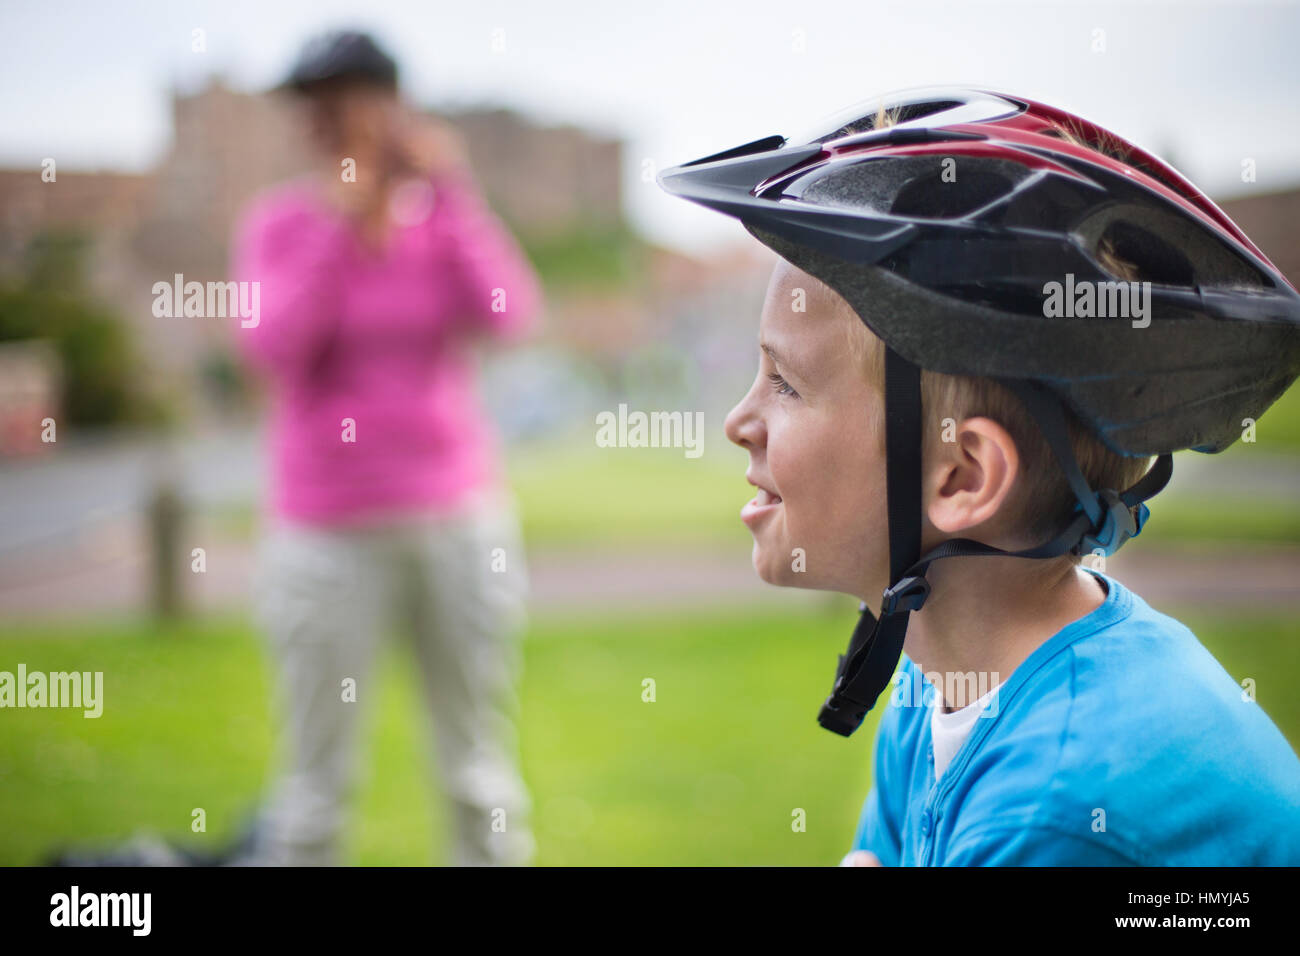 Child in the foreground with a bicycle helmet on while his mother is in the background taking a picture of him. Stock Photo